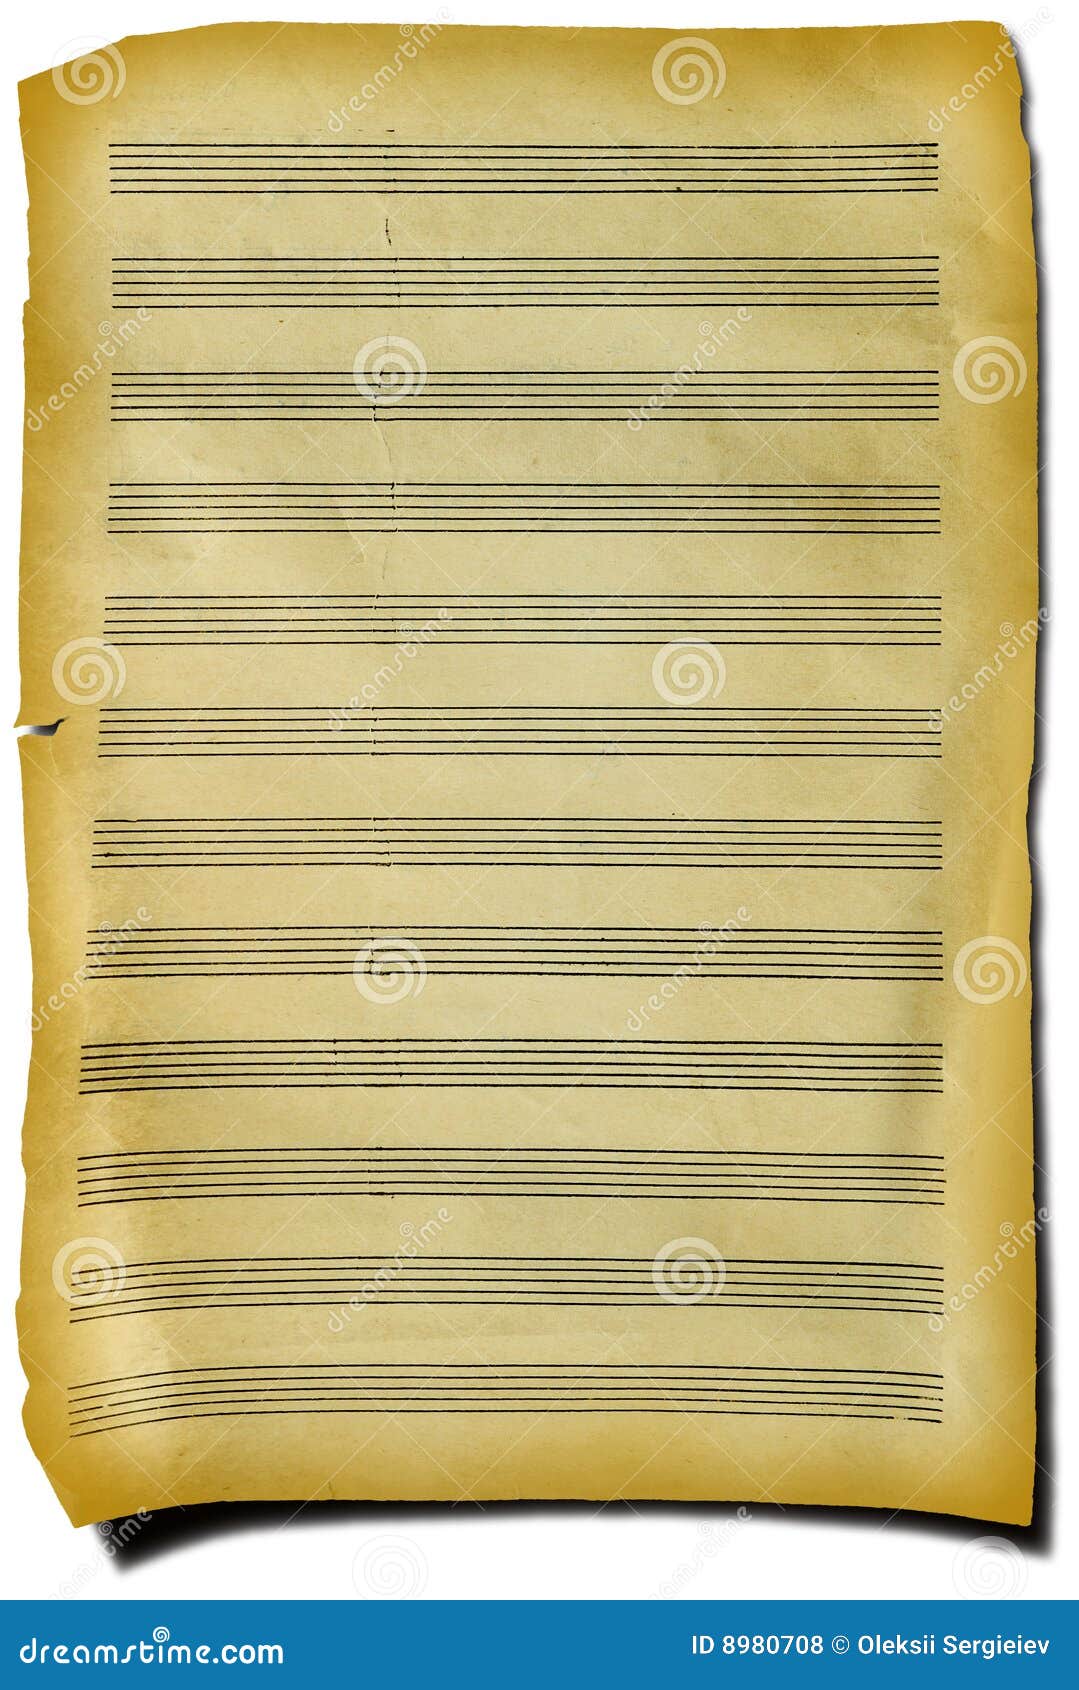 Fragment of Sheet with Music Stock Photo - Image of melody, frame: 8980708